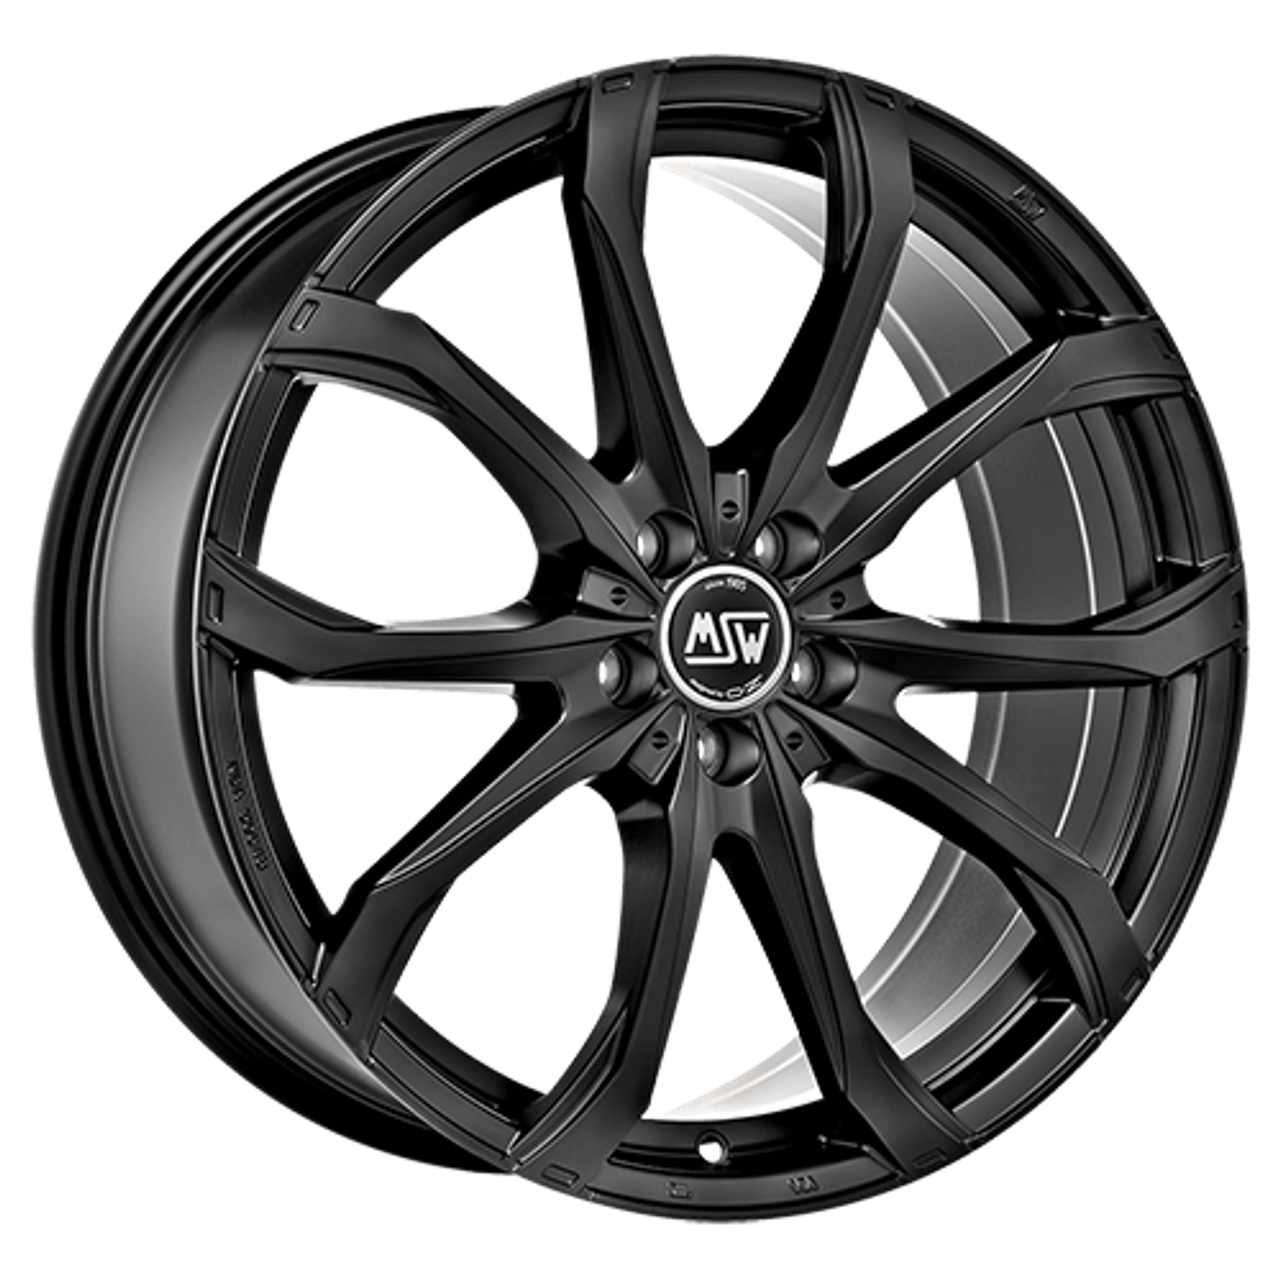 MSW (OZ) MSW 48 gloss black full polished 7.5Jx17 5x112 ET45